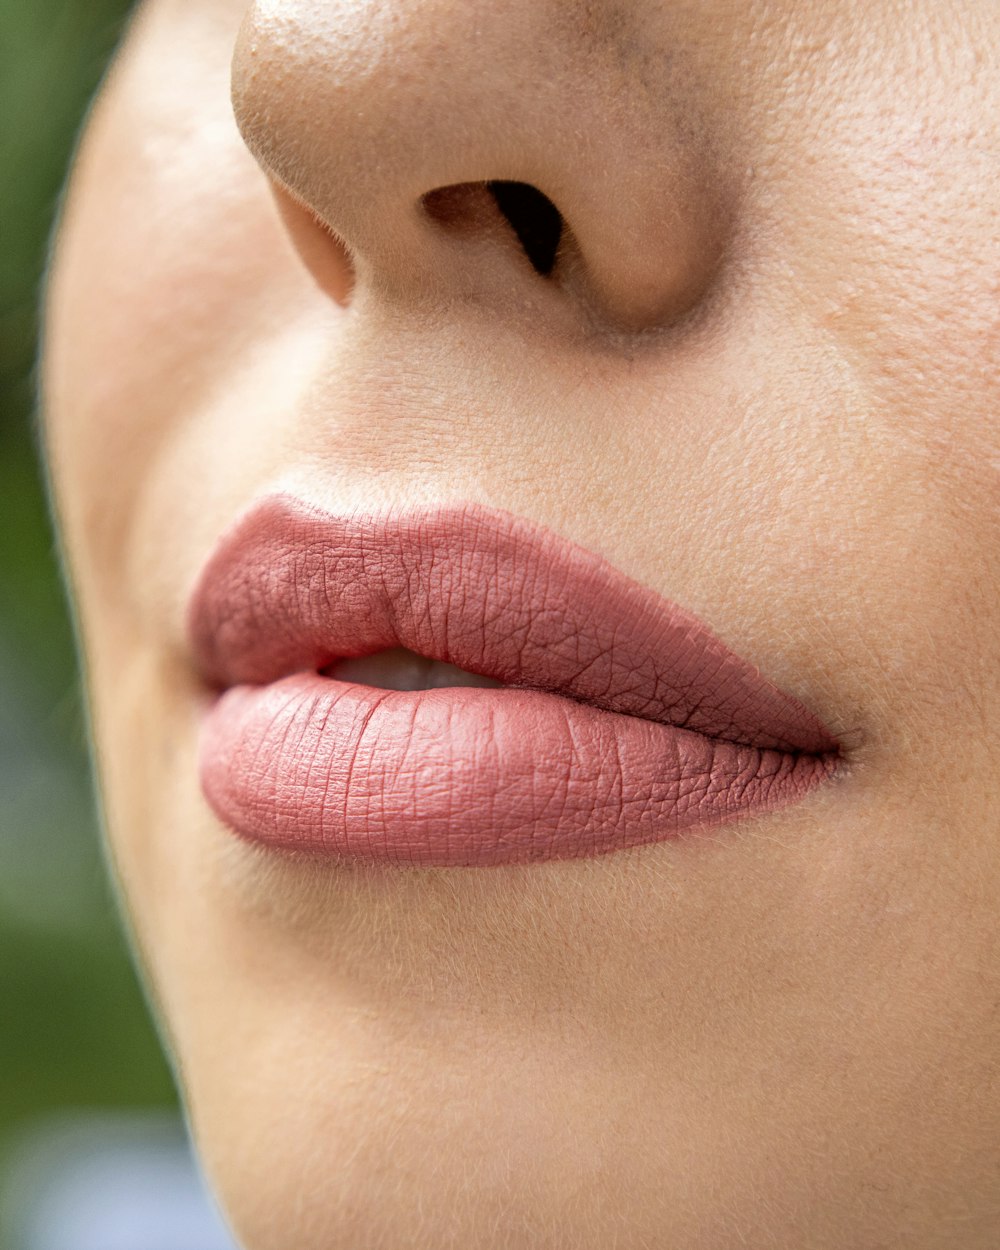 a close up of a woman's lips with a green background